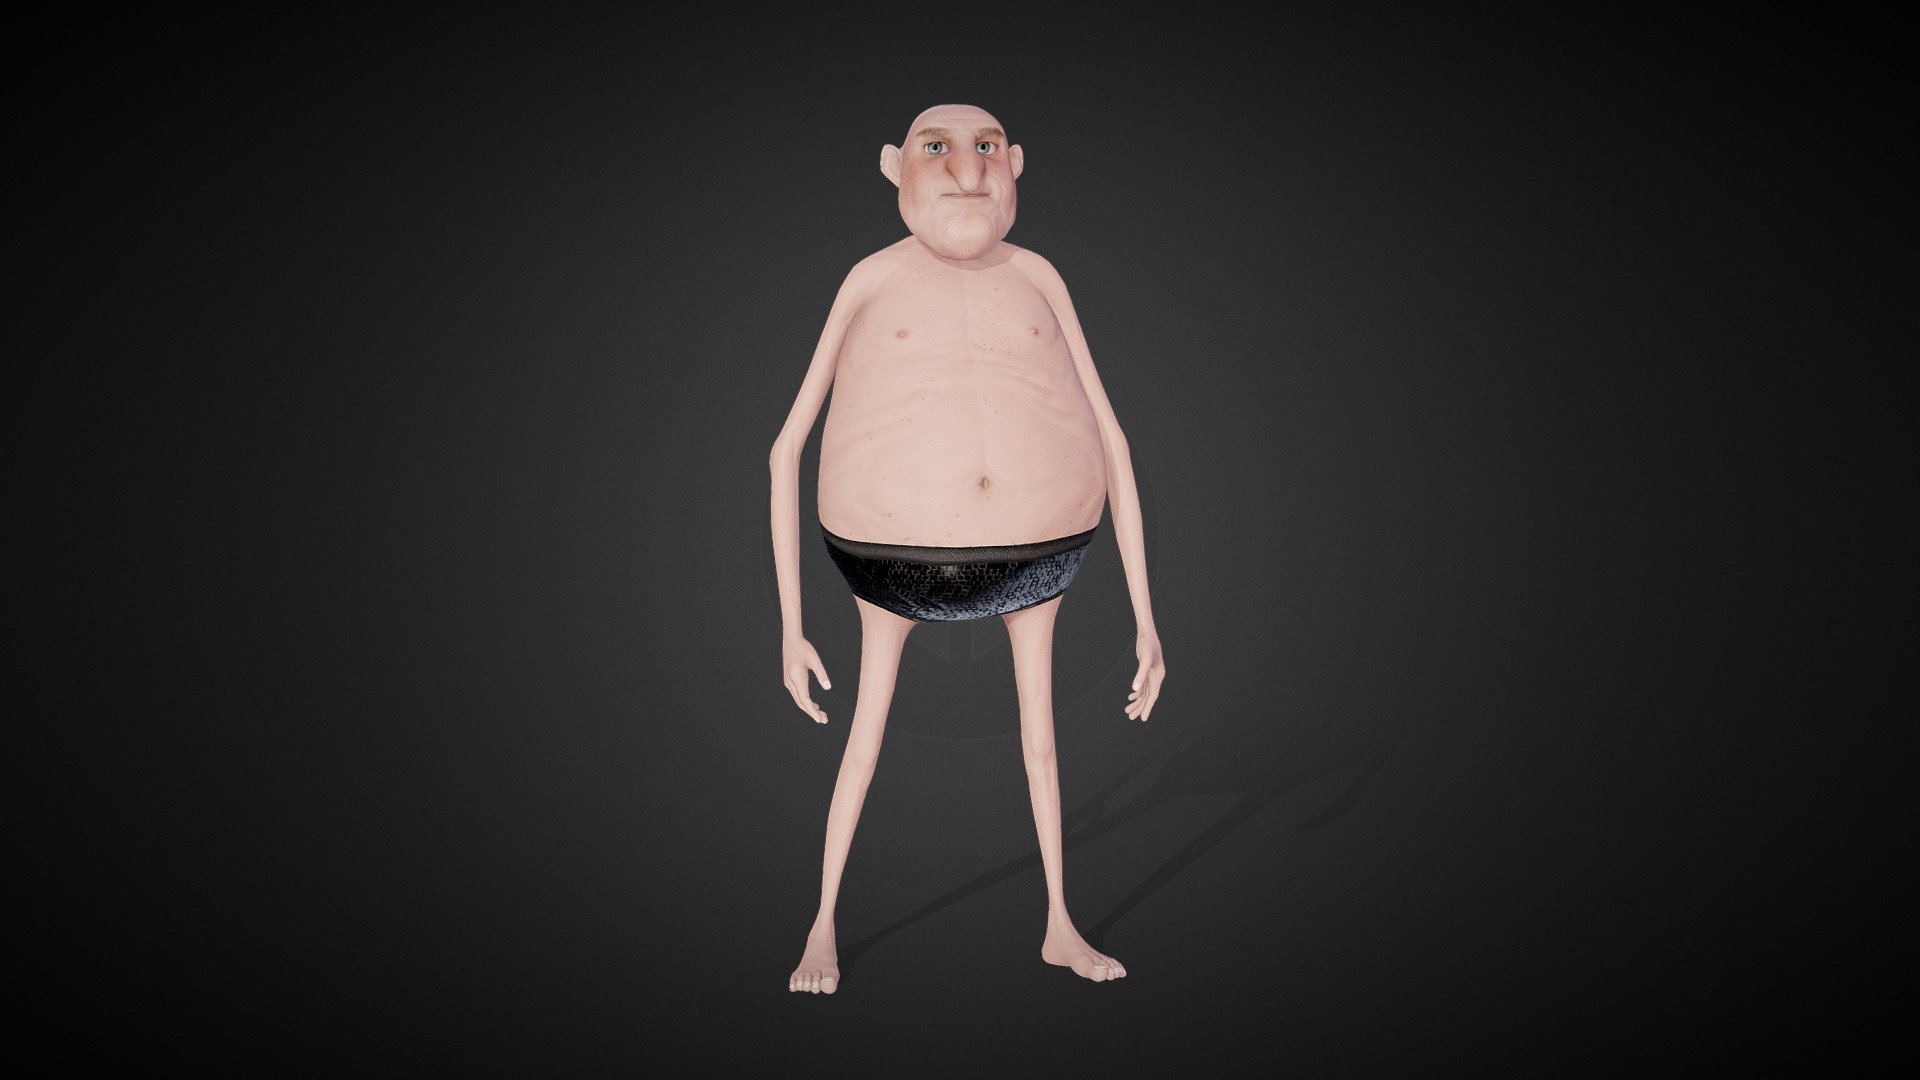 CC4 Boris (CC1 character now remastered for Character Creator 4)

Find out more here:
https://marketplace.reallusion.com/cc4-stylized-base-combo-remastered

You are looking for characters for your project? Check out all my Character Creator assets here:
https://www.reallusion.com/contentstore/featureddeveloper/profile/#!/ToKoMotion/Character%20Creator - CC4 Boris (CC1 Remastered) - 3D model by ToKoMotion 3d model